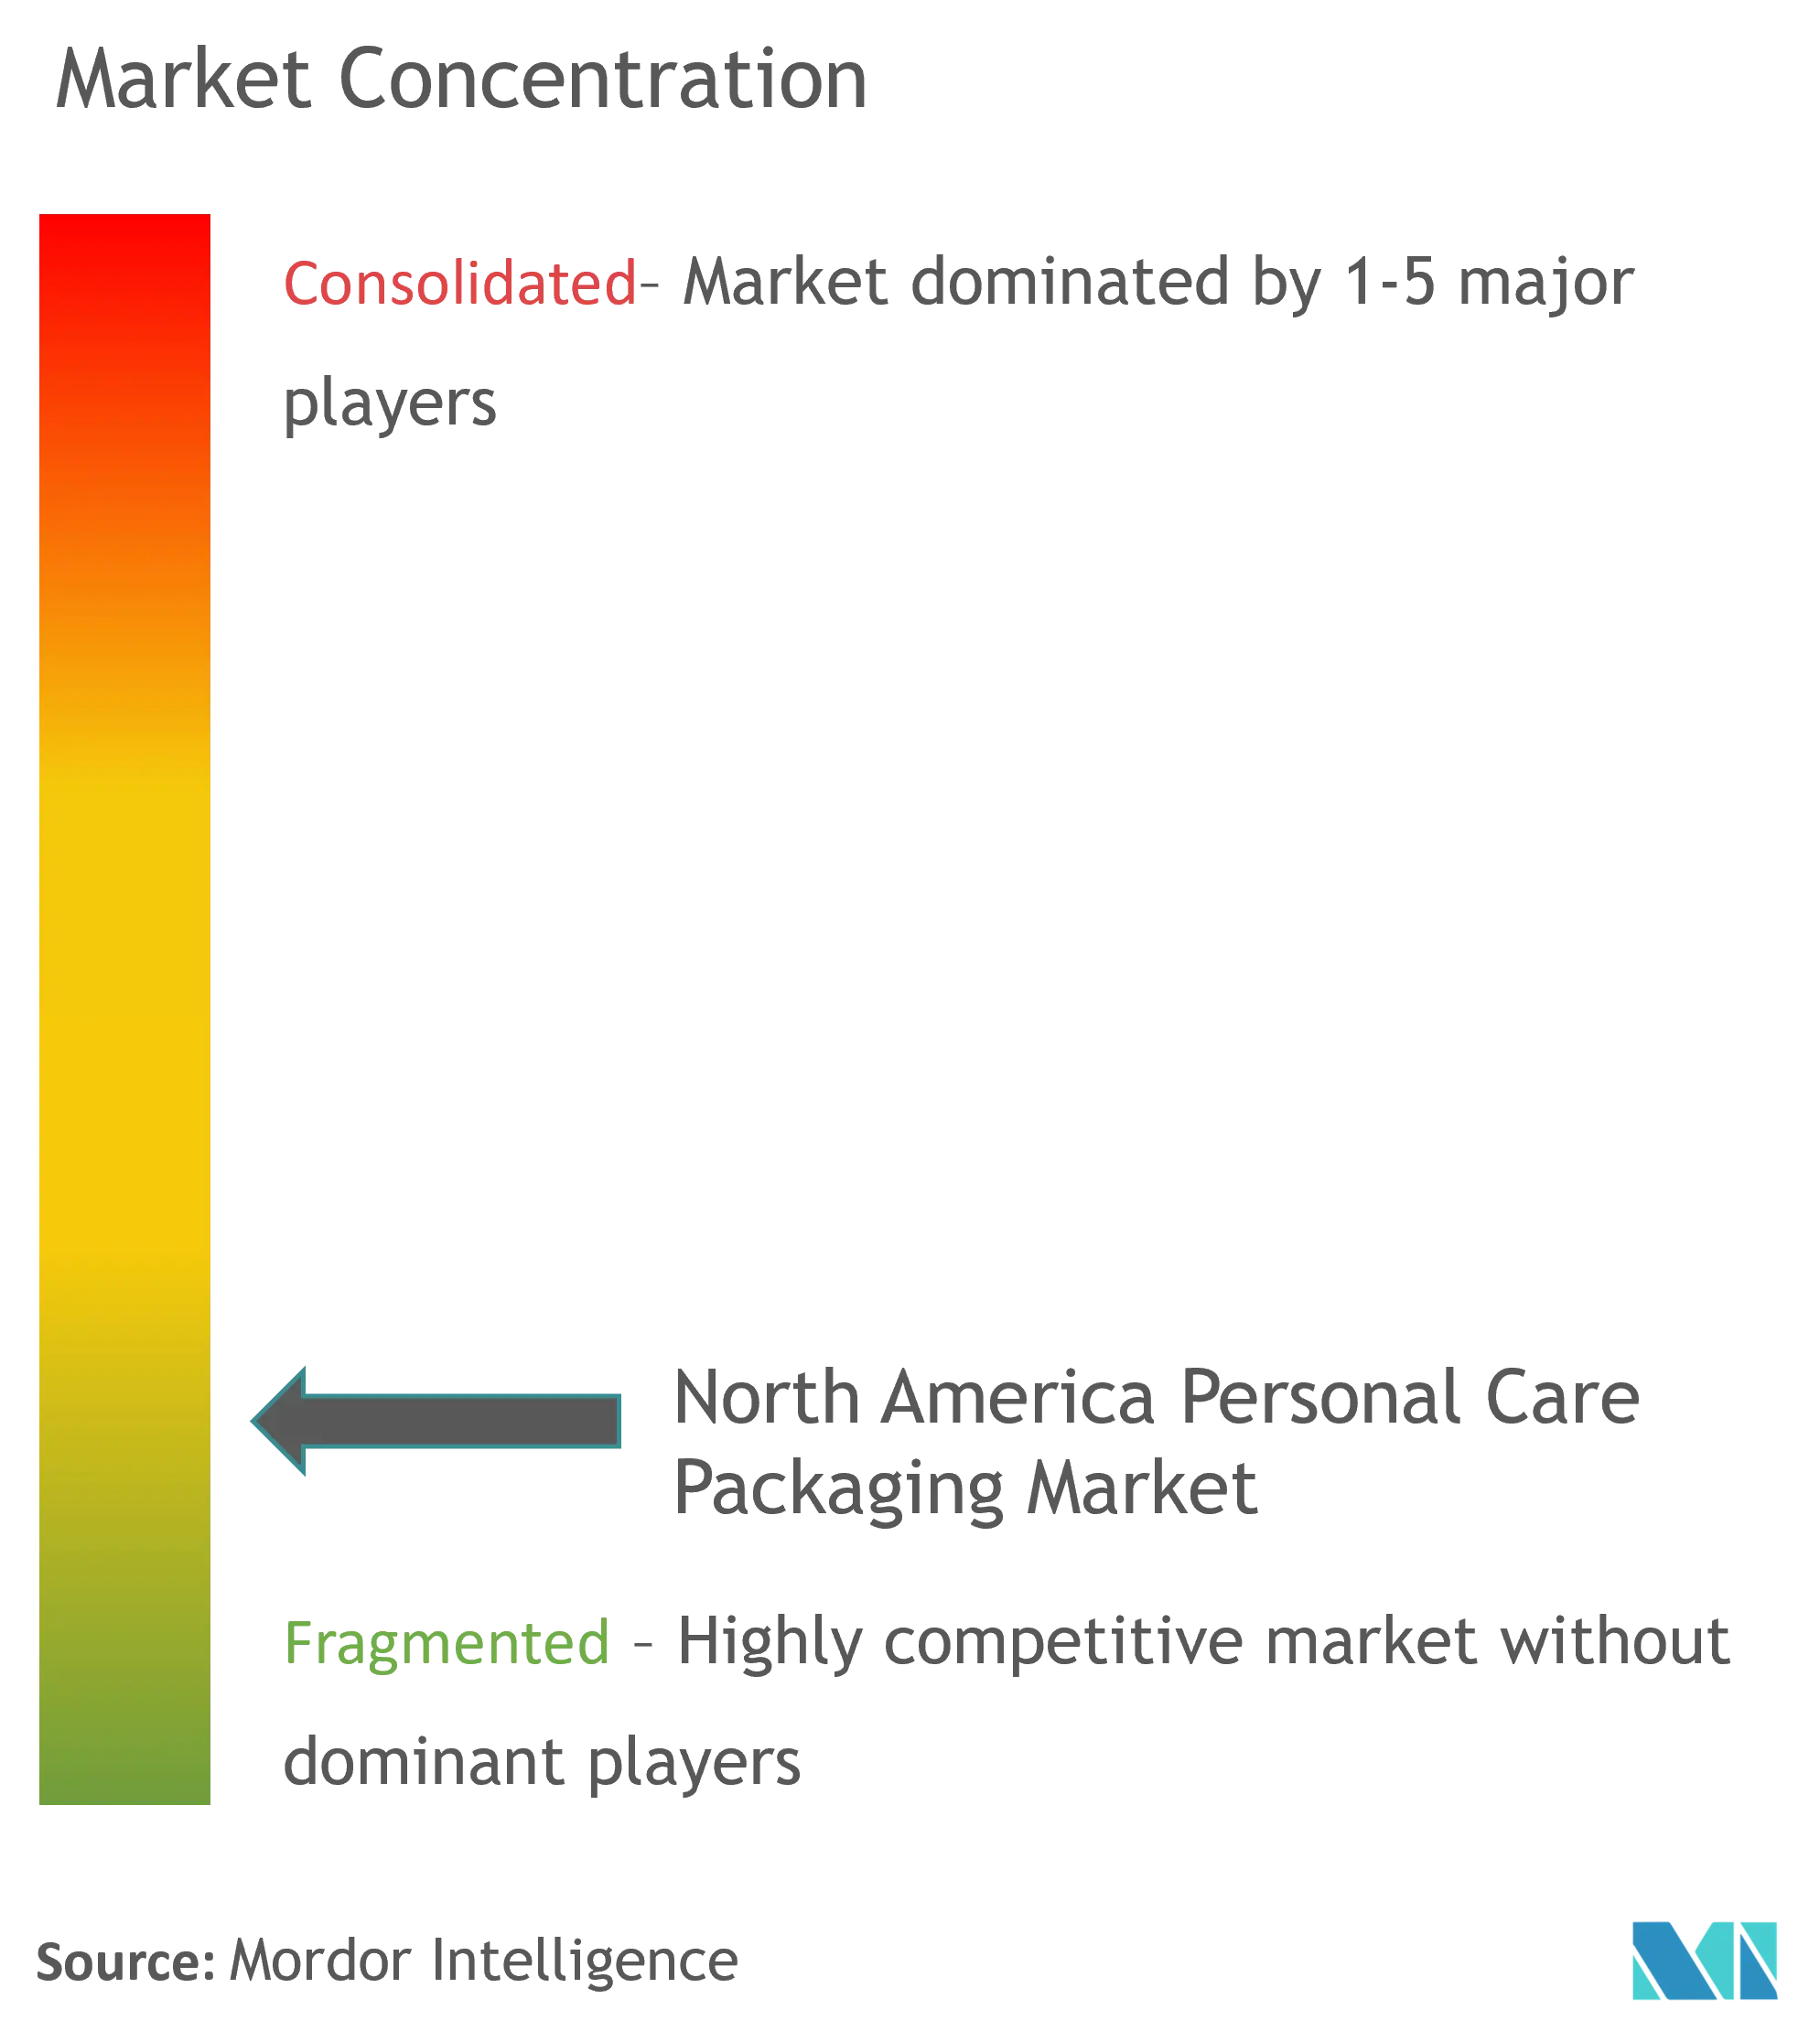 North America Personal Care Packaging Market